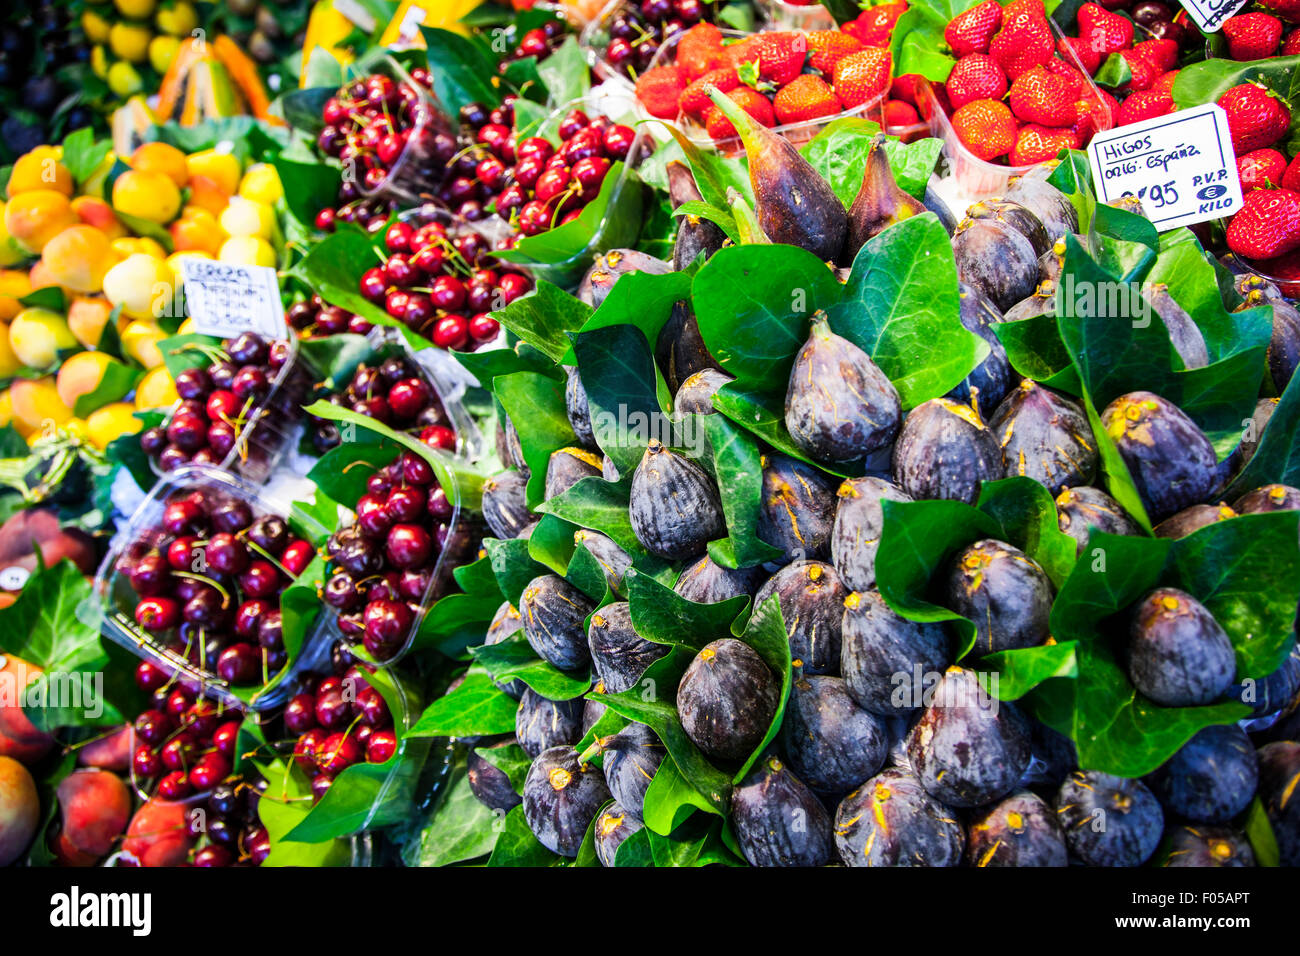 Colourful fruit and figs at market stall in Boqueria market in Barcelona. Stock Photo